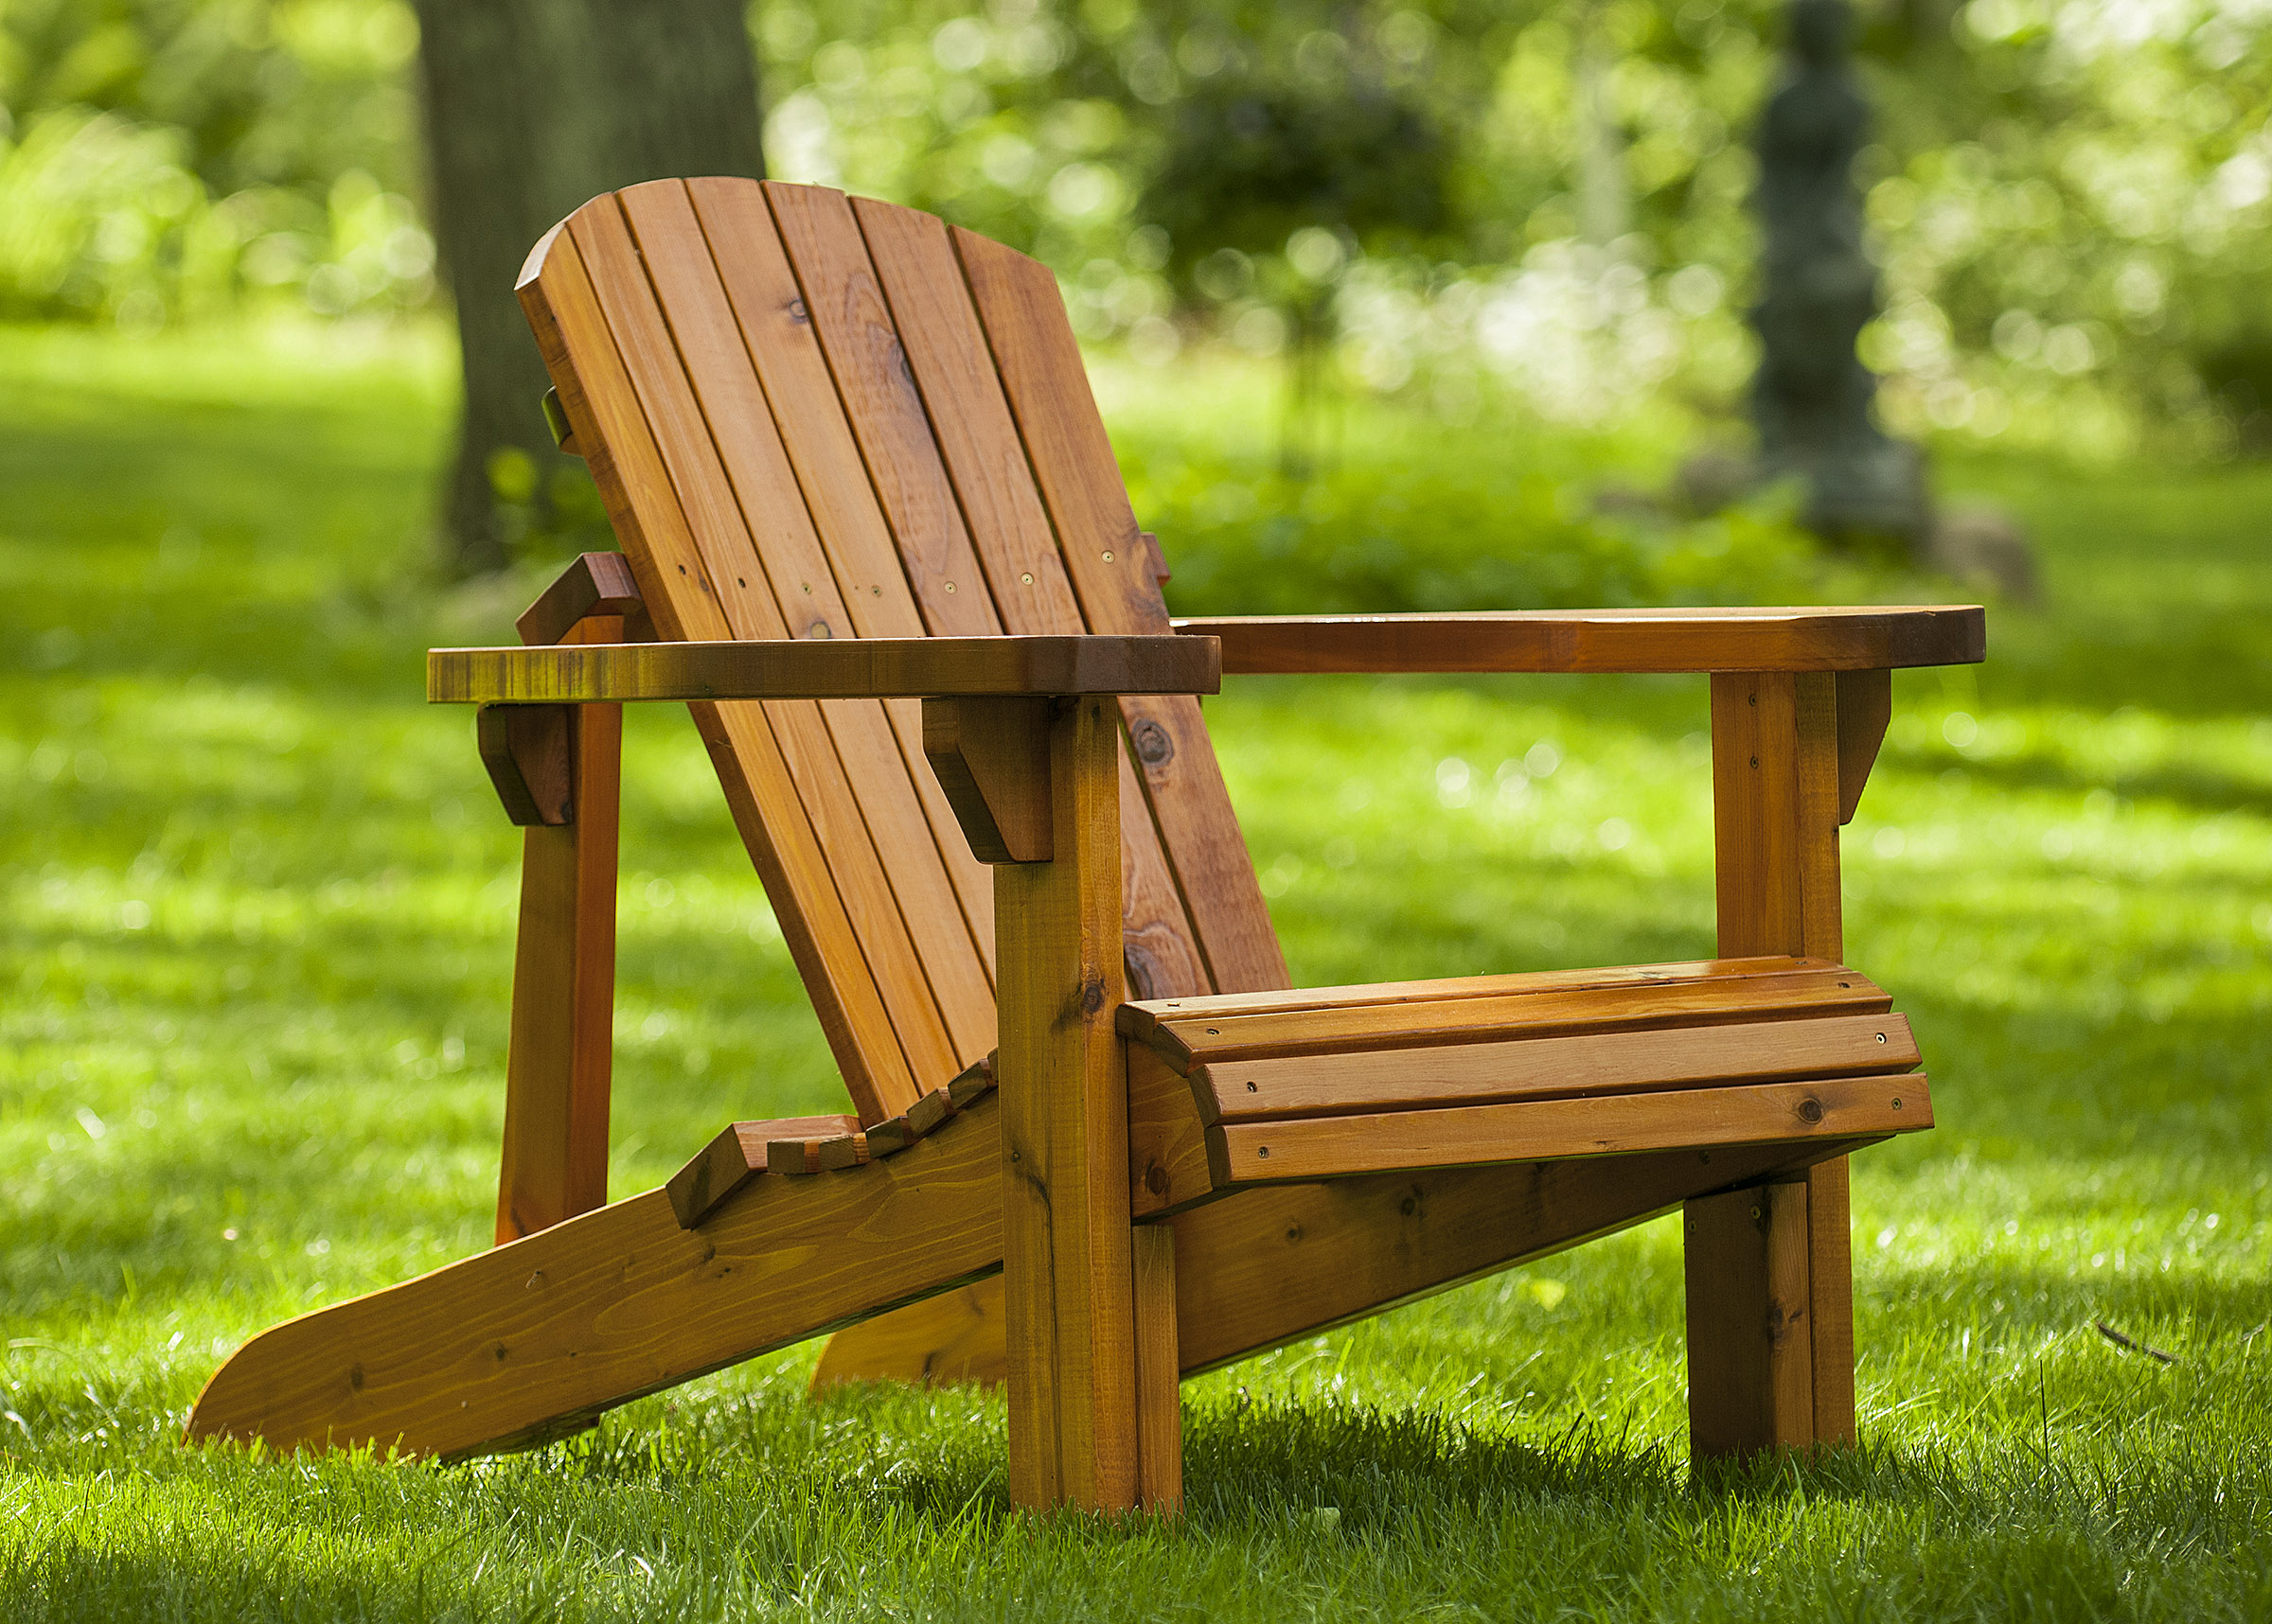 Adirondack Chairs - Classified Ads | In-Depth Outdoors